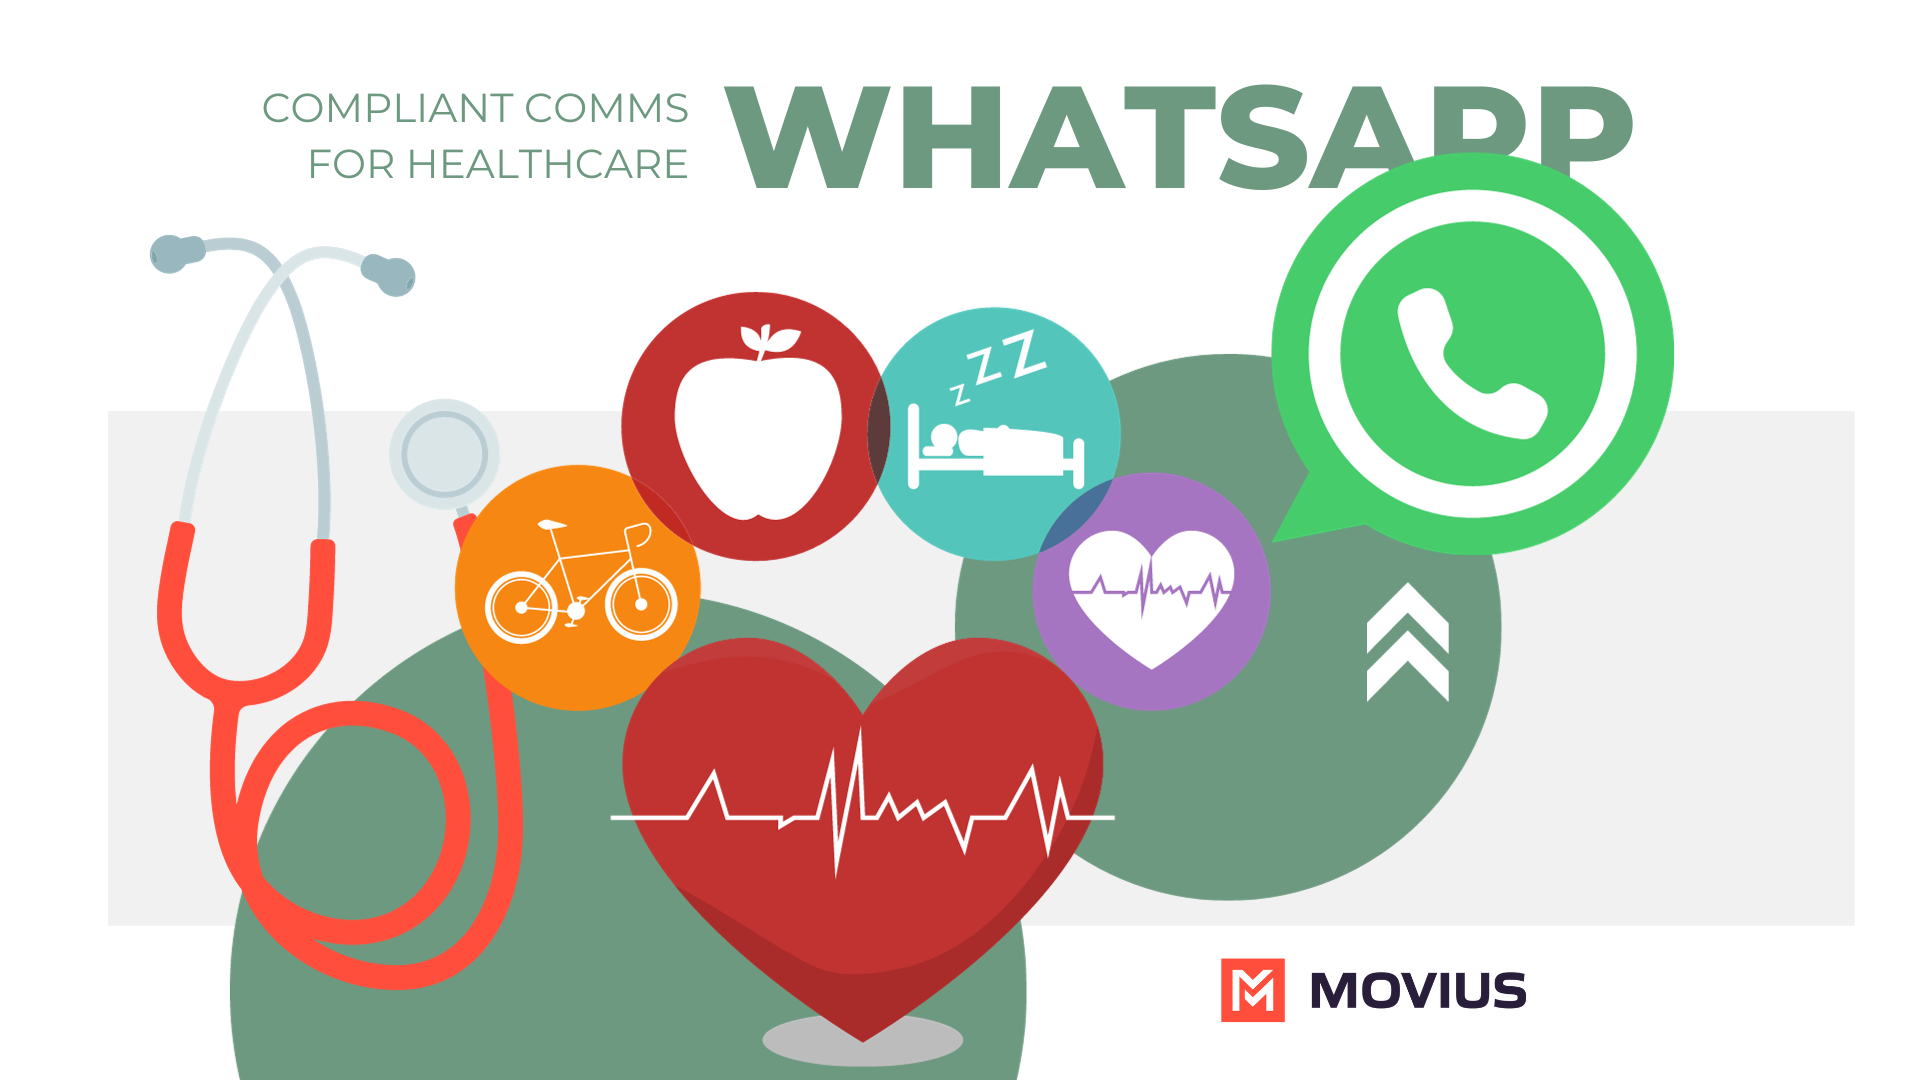 WhatsApp Compliant Comms for Healthcare